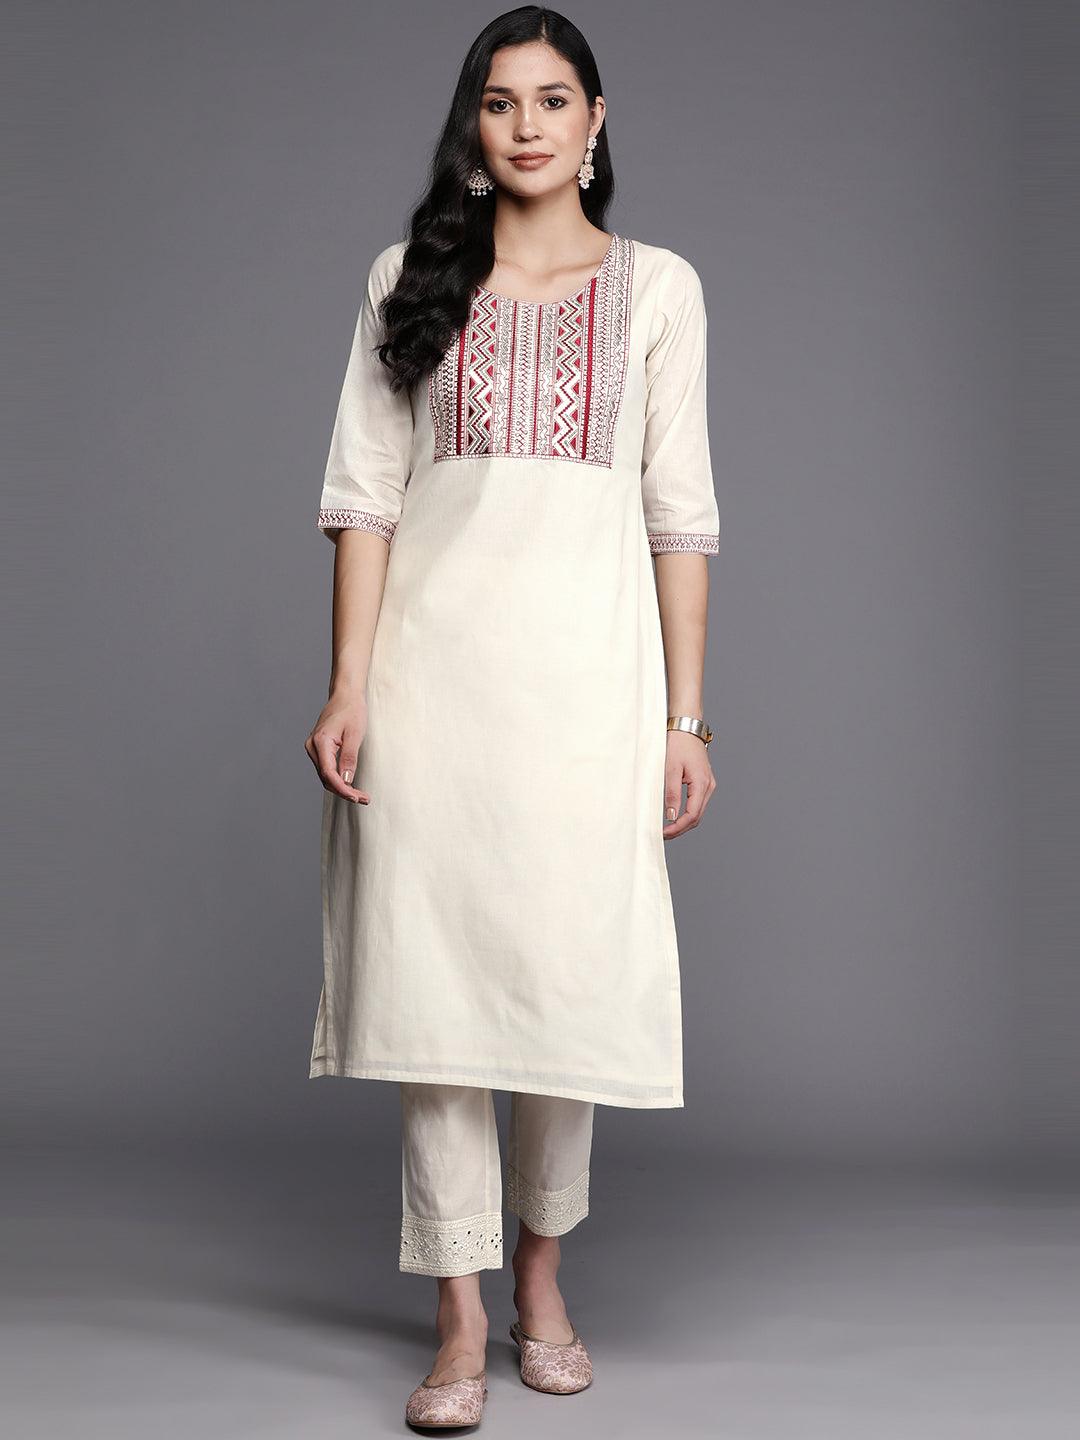 Buy Off White Printed Cotton Straight Kurta Online at Rs.629 | Libas